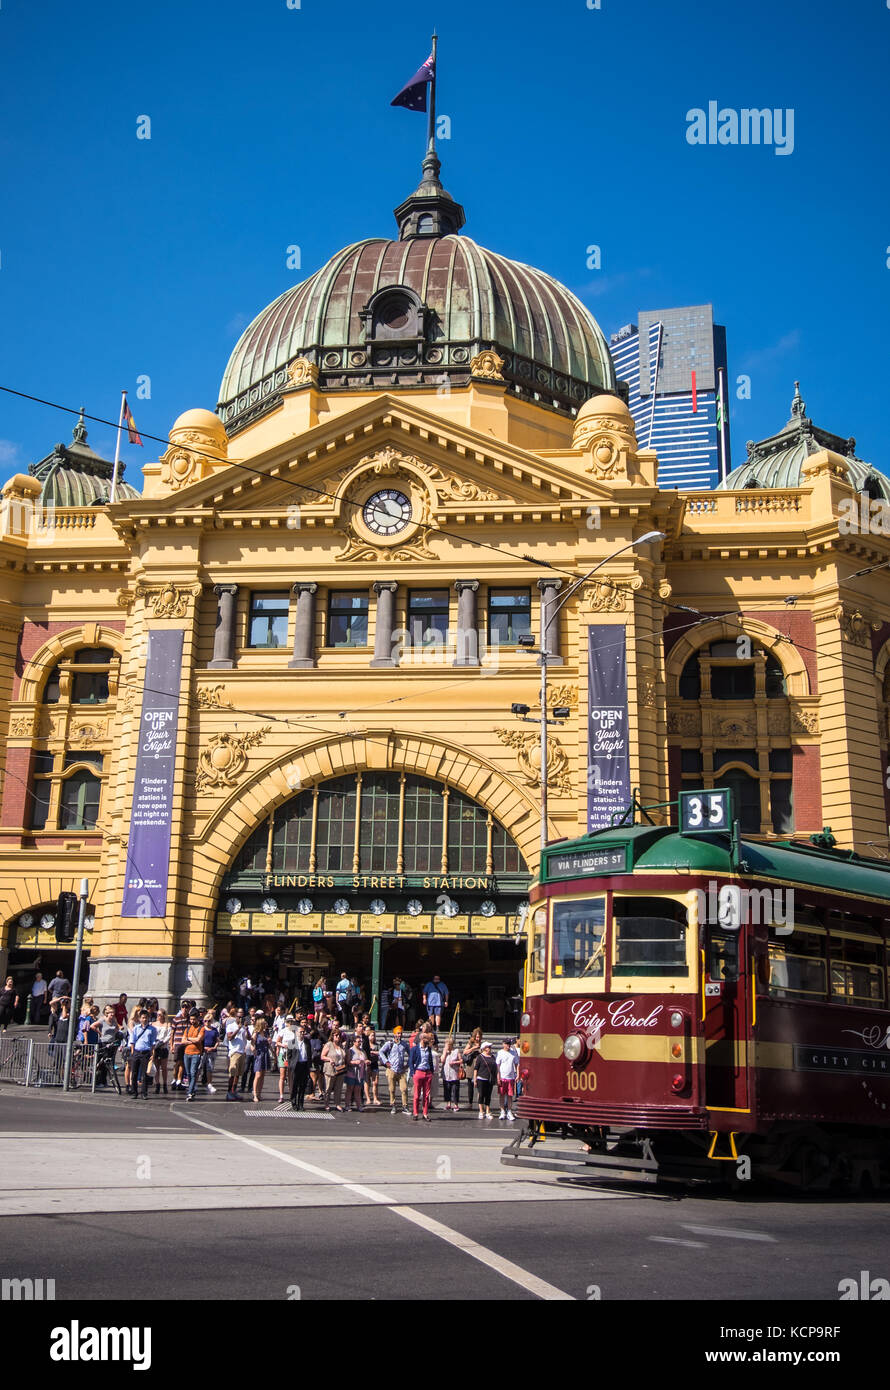 A general view of Flinders Street Station in the Australian city of Melbourne Stock Photo